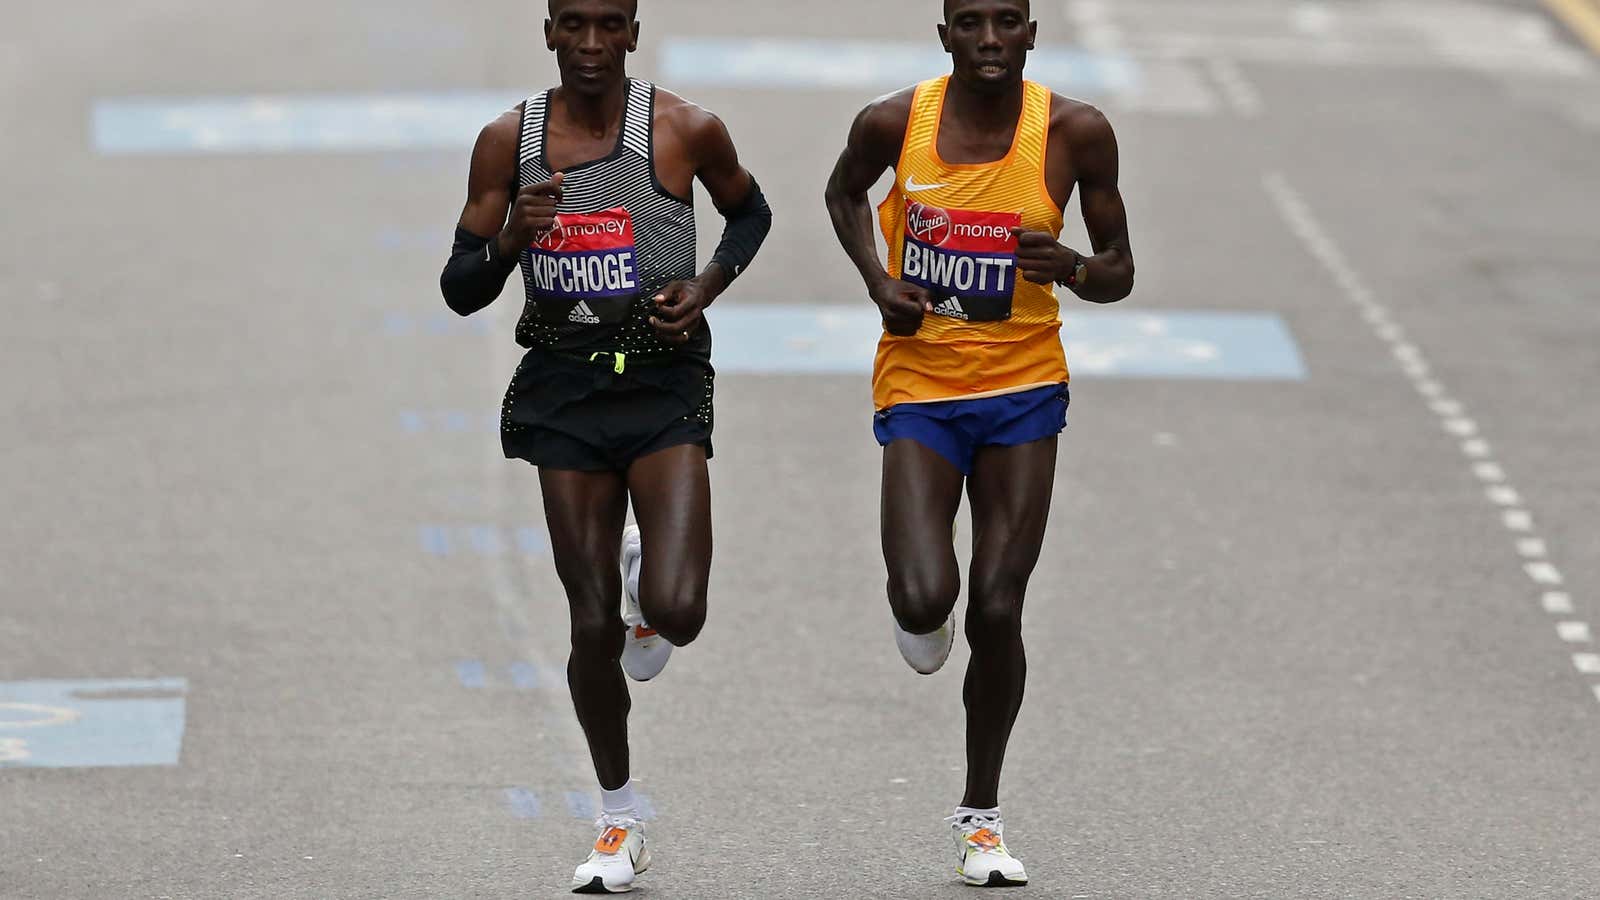 The London Marathon’s first and second place winners, Eliud Kipchoge and Stanley Biwott, both from Kenya.